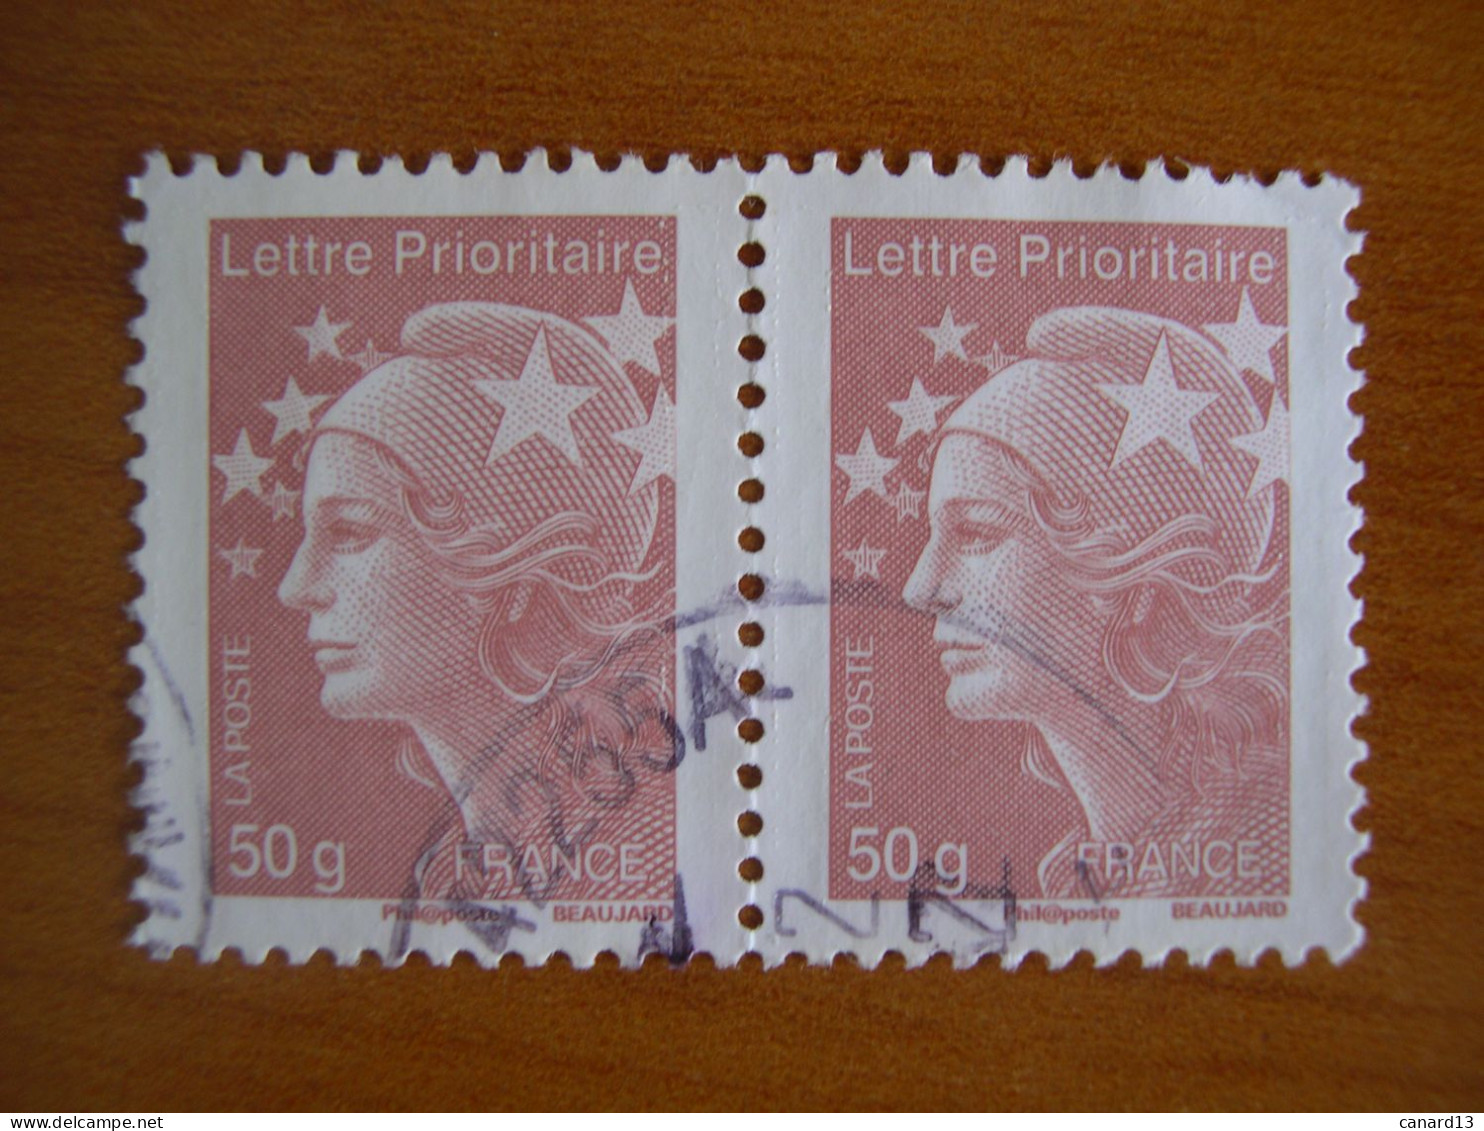 France Obl   Marianne N° 4569 Paire Cachet Rond Noir - 2008-2013 Marianne (Beaujard)